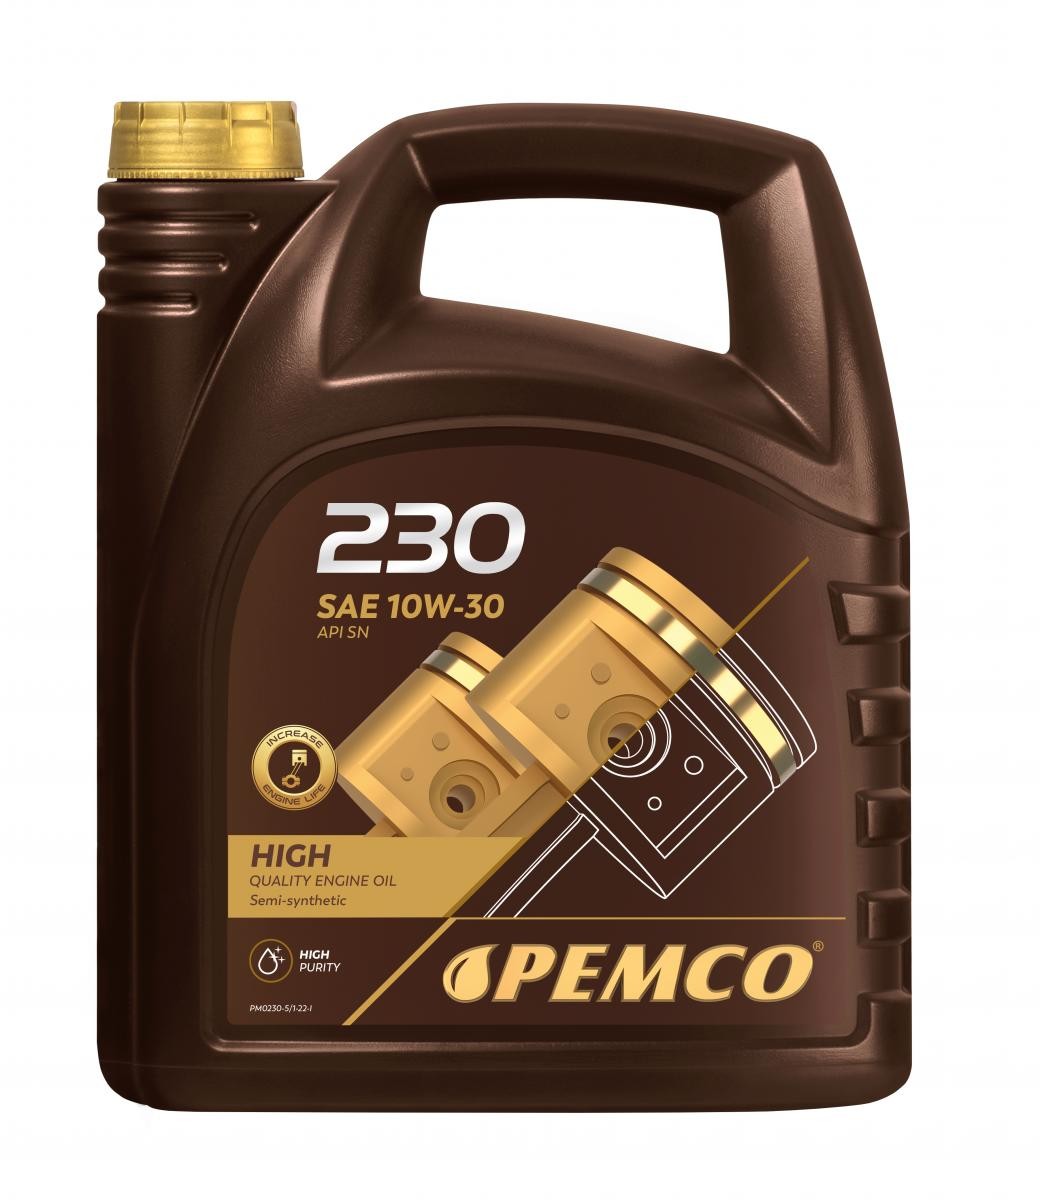 Great value for money - PEMCO Engine oil PM0230-5